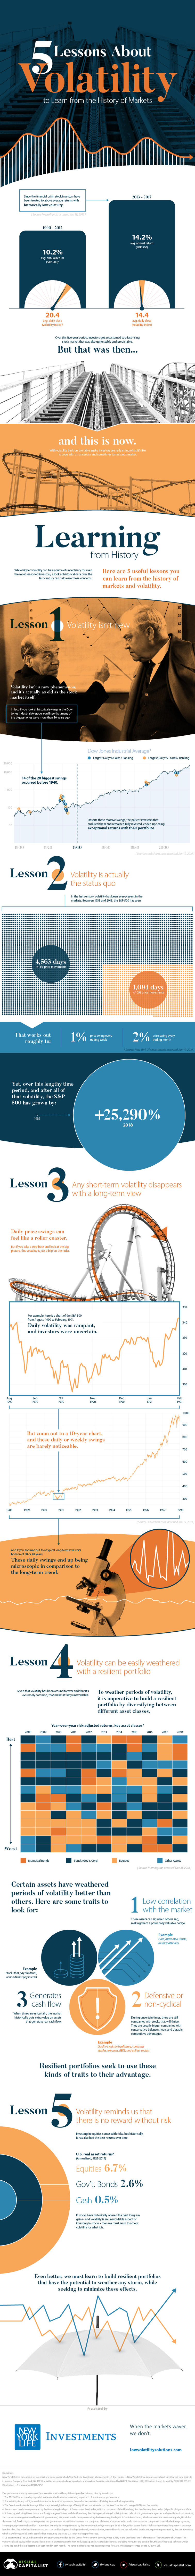 5 Lessons About Volatility to Learn From the History of Markets